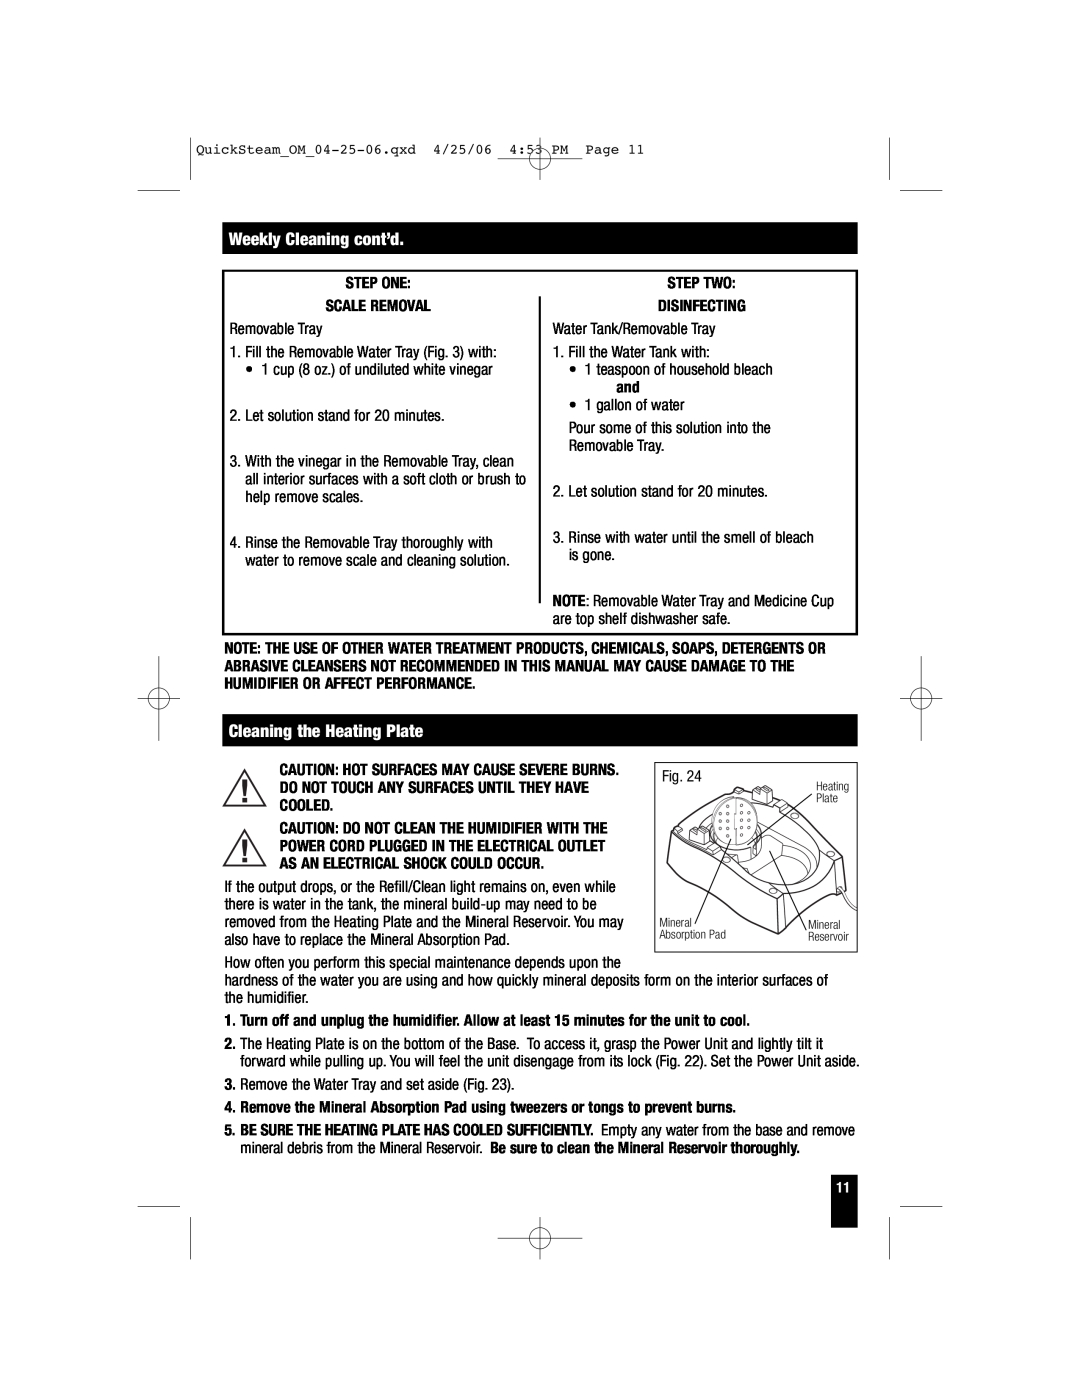 Honeywell HWM-331, HWM-450, HWM-335, HWM-330 owner manual Weekly Cleaning cont’d, Cleaning the Heating Plate 